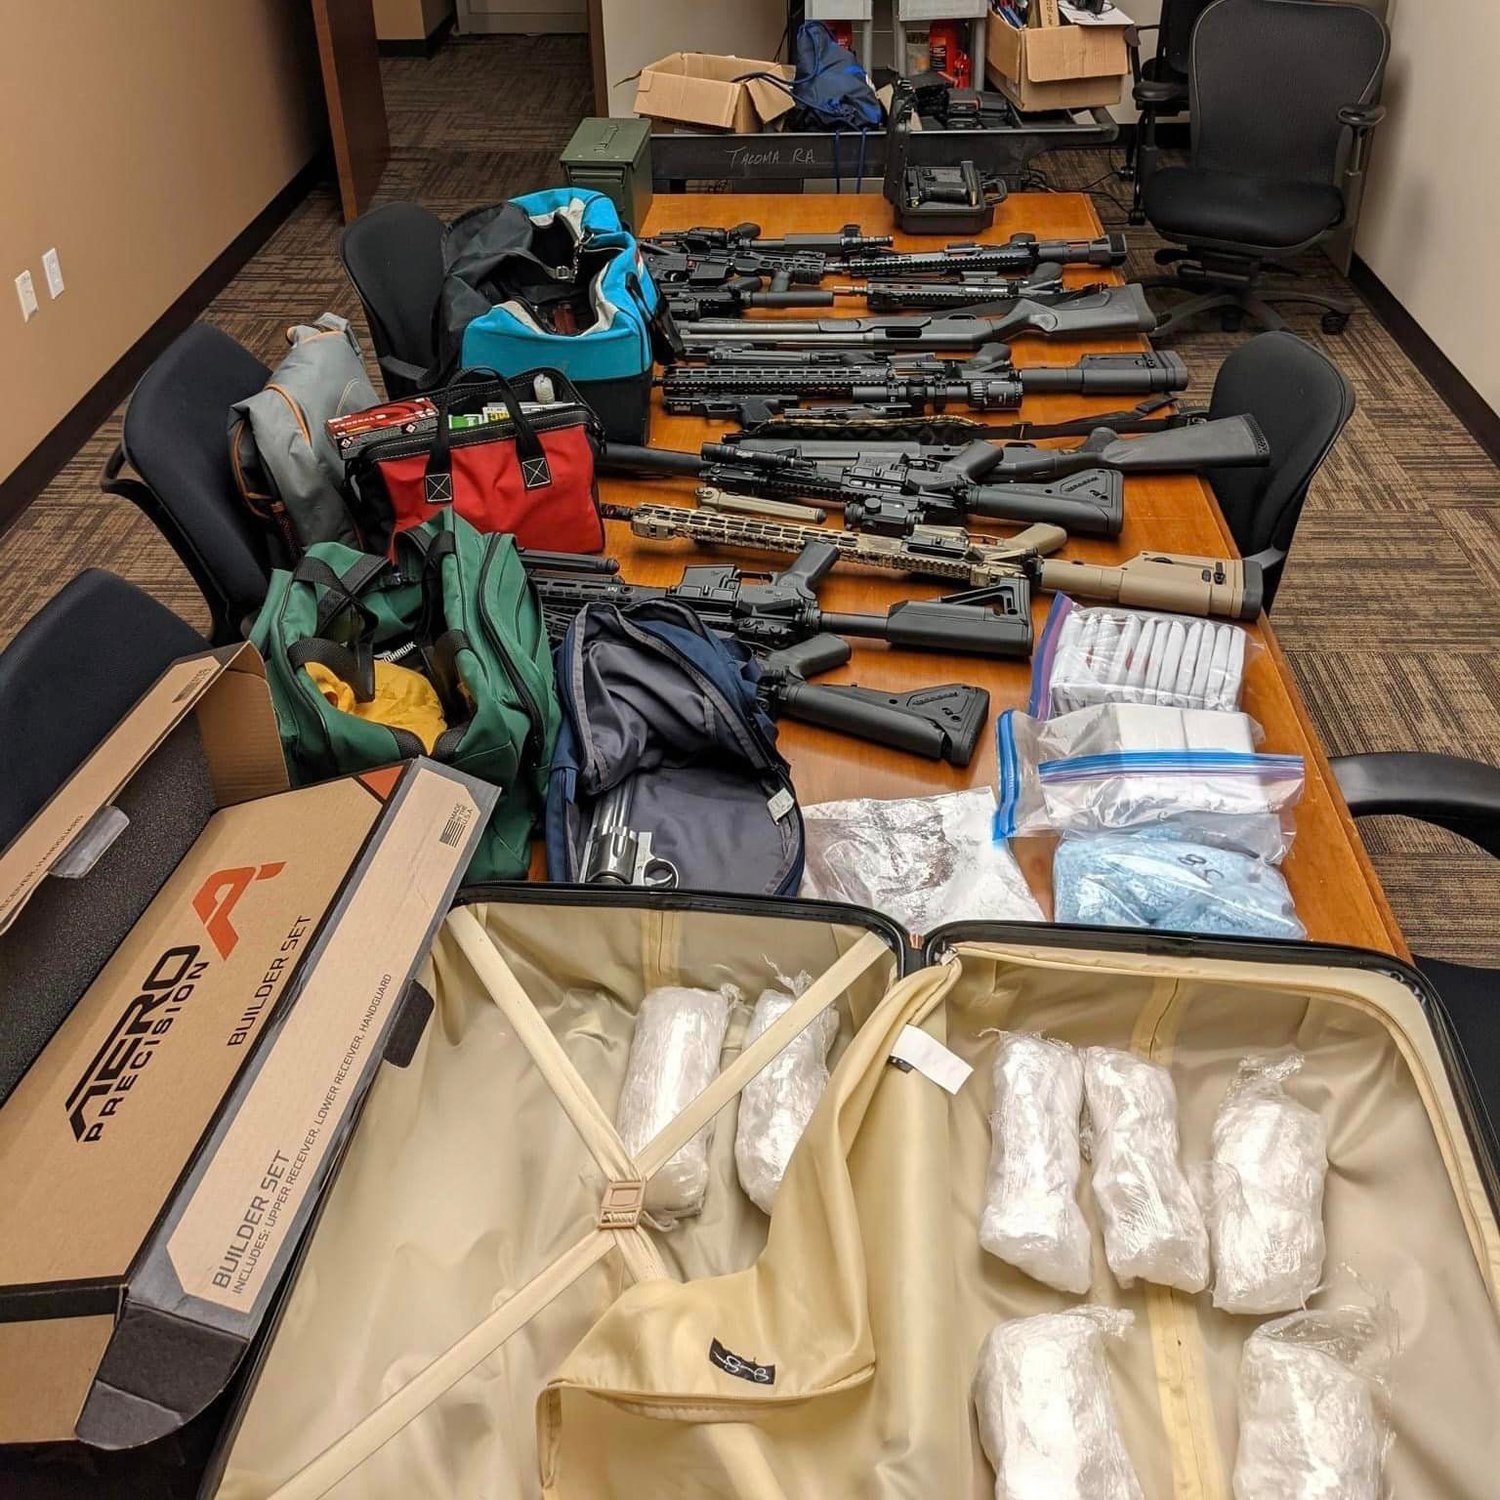 A coordinated arrest and search operation last Wednesday — involving 10 SWAT teams and more than 350 officers — yielded 177 guns, several kilograms of drugs and more than $330,000 in cash from 18 locations in Washington and Arizona.